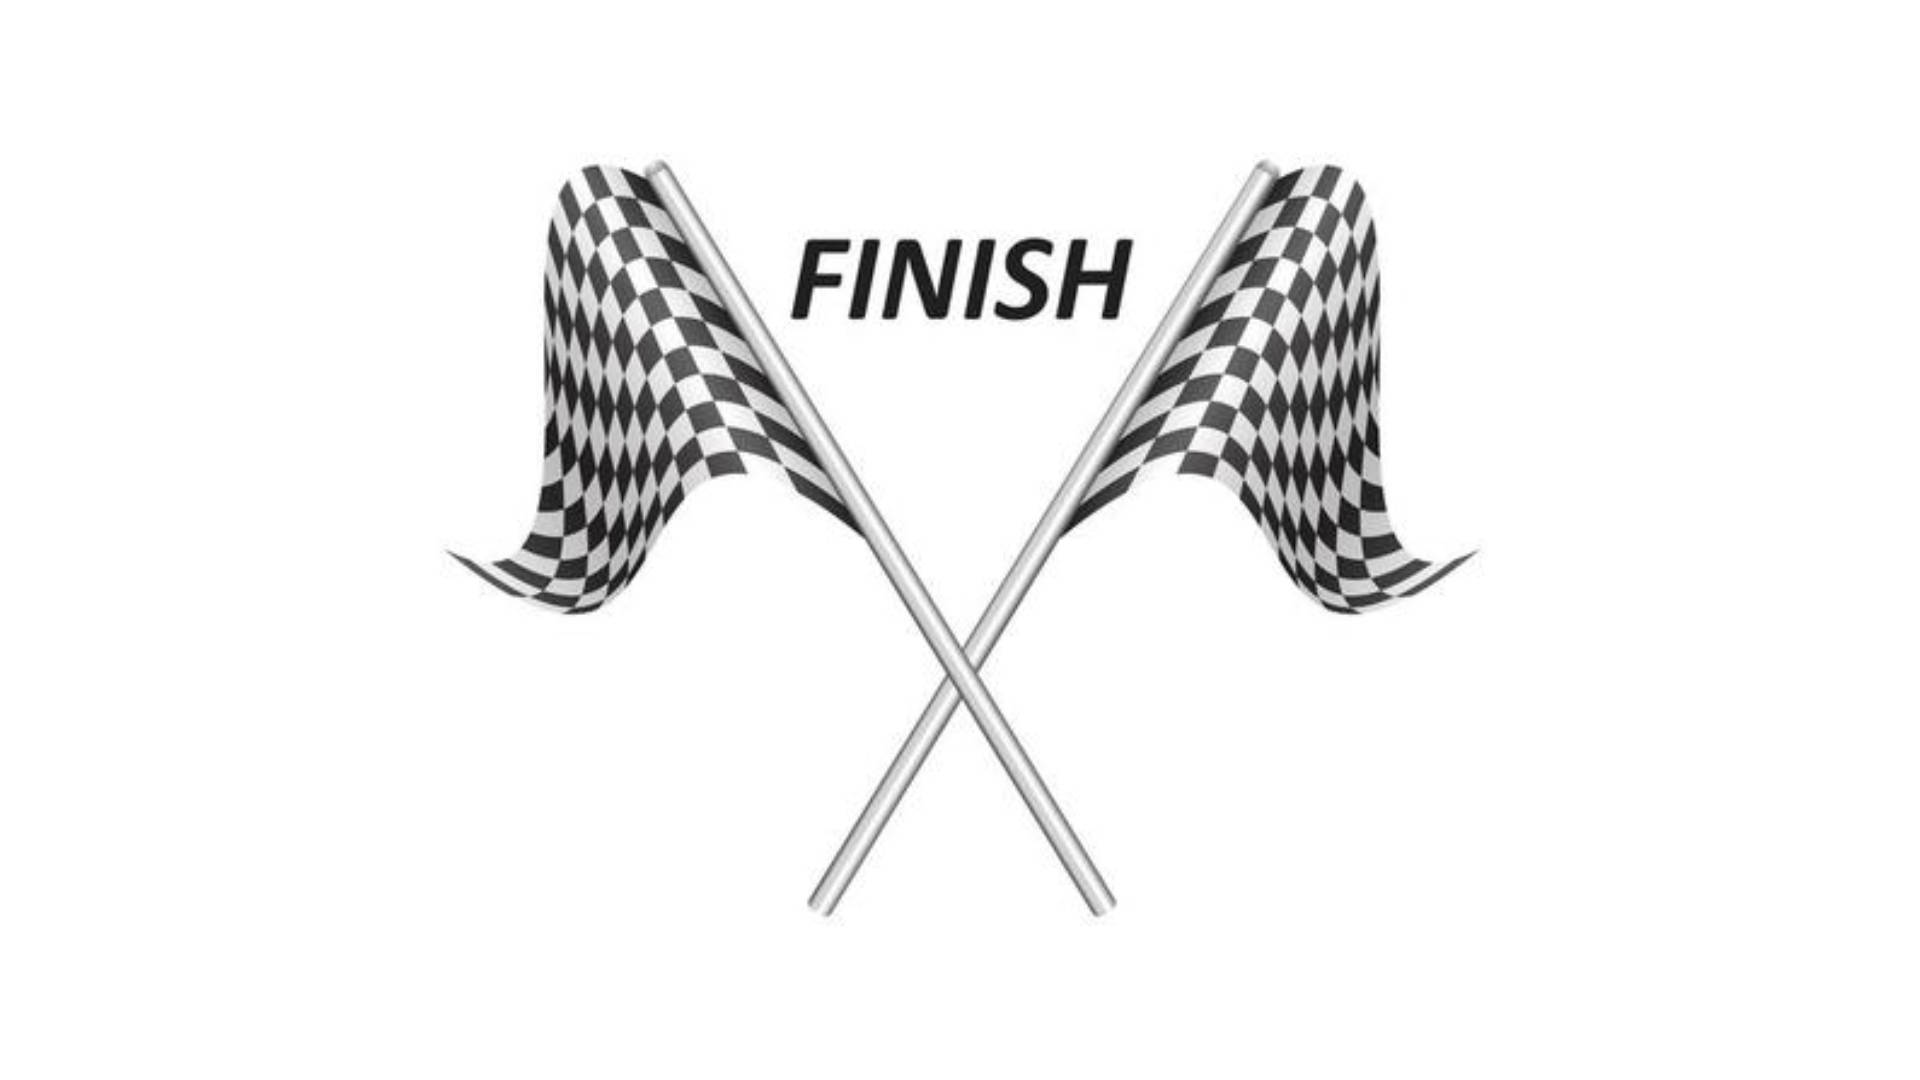 Finish Crossed Checkered Flags Background